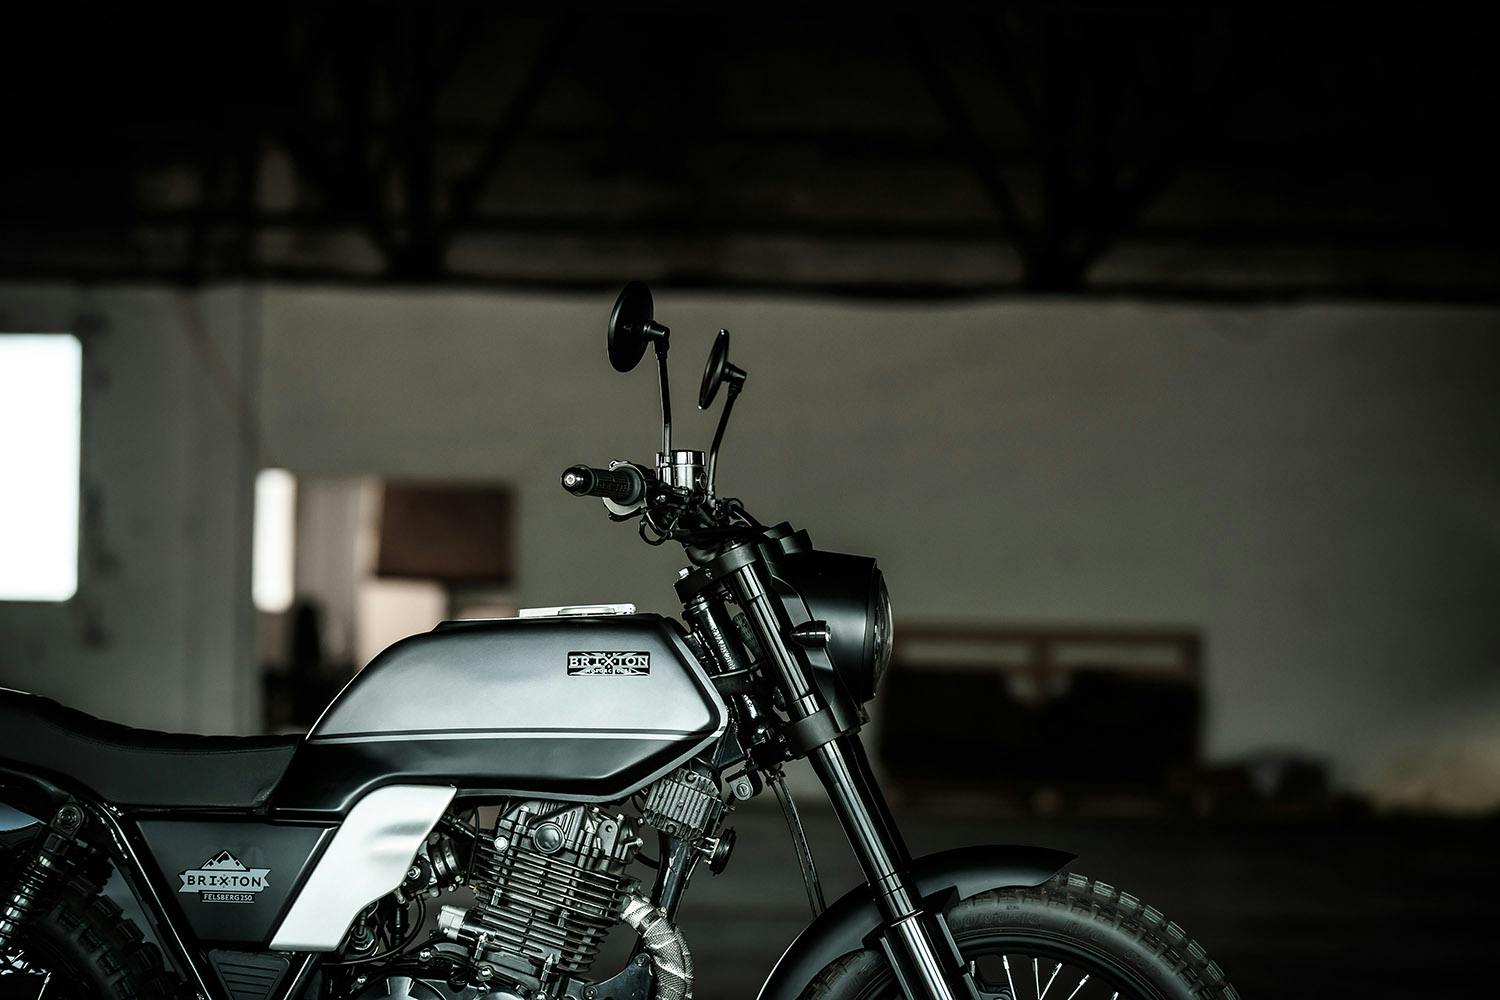 Cropped side view of the fuel tank and handlebar of the Brixton Motorcycles Felsberg 250 in Timberwolf Grey